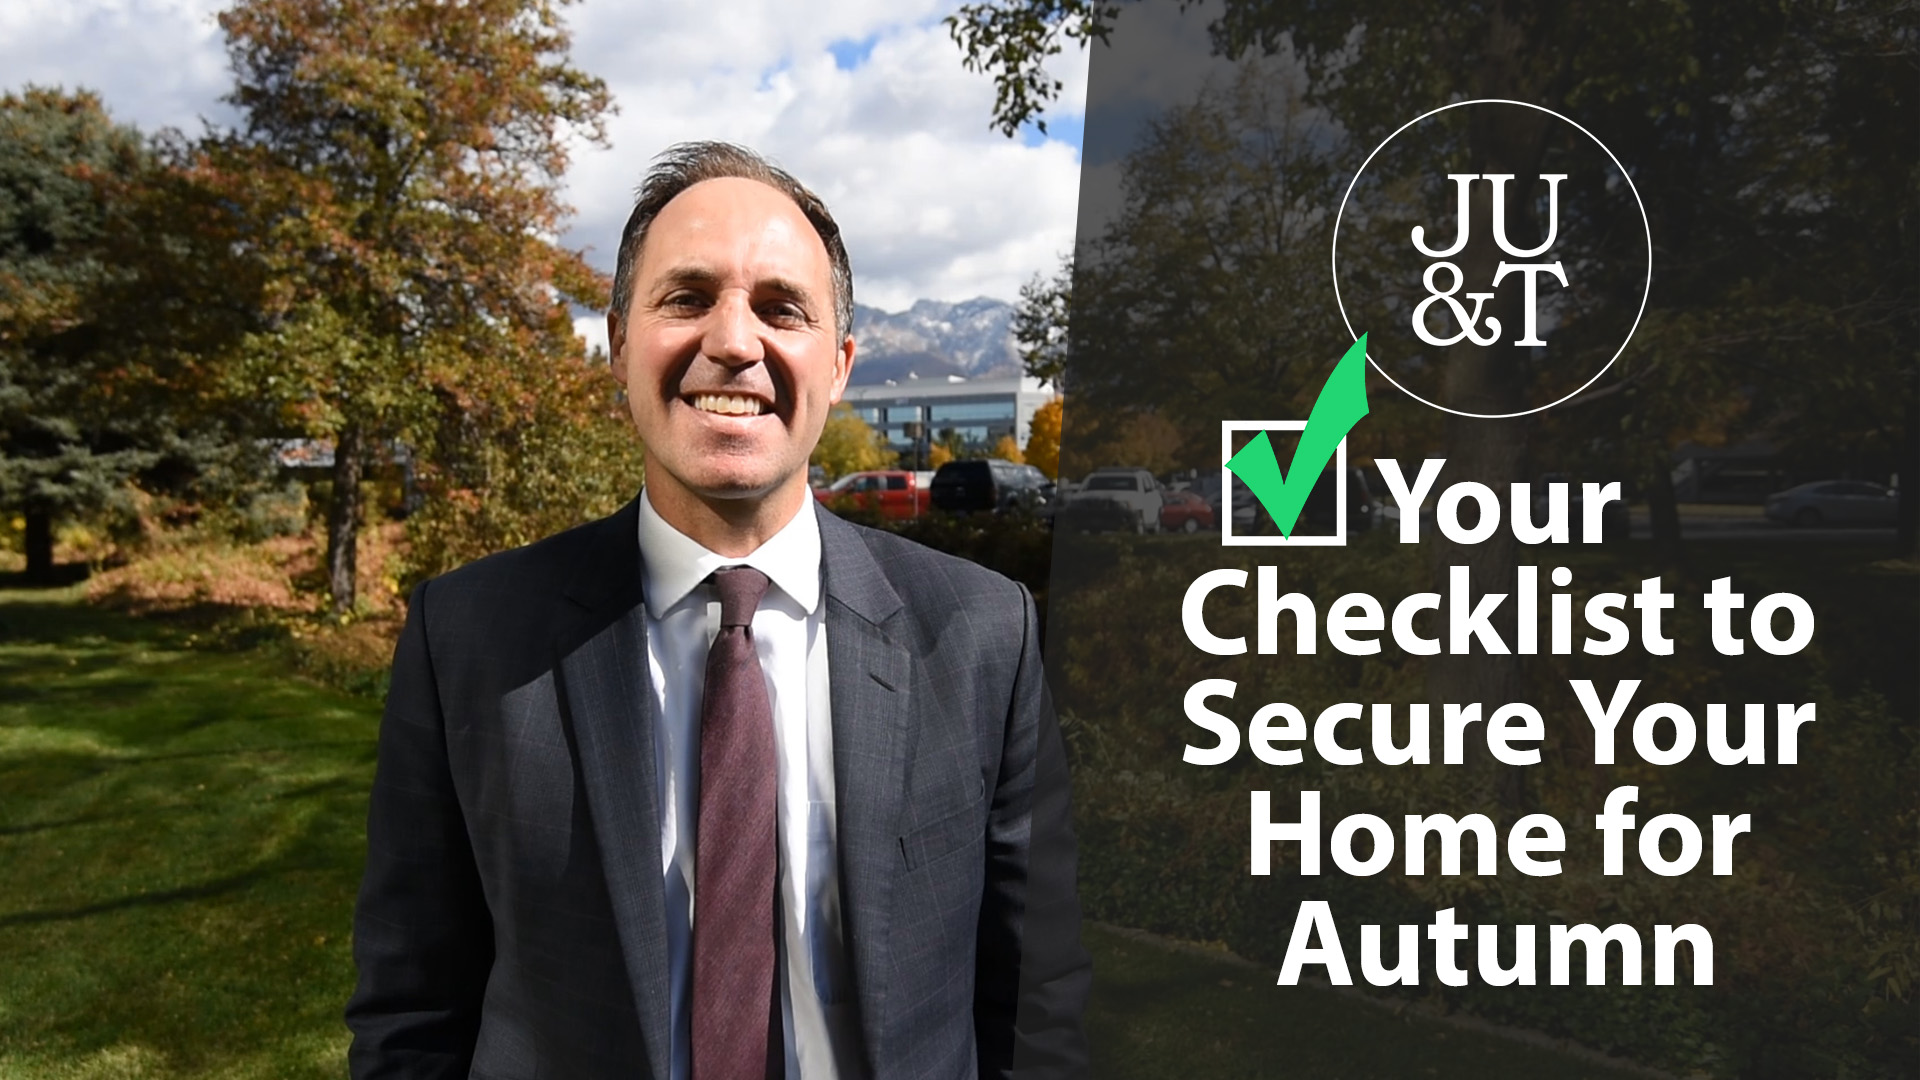 A Checklist For Securing Your Home